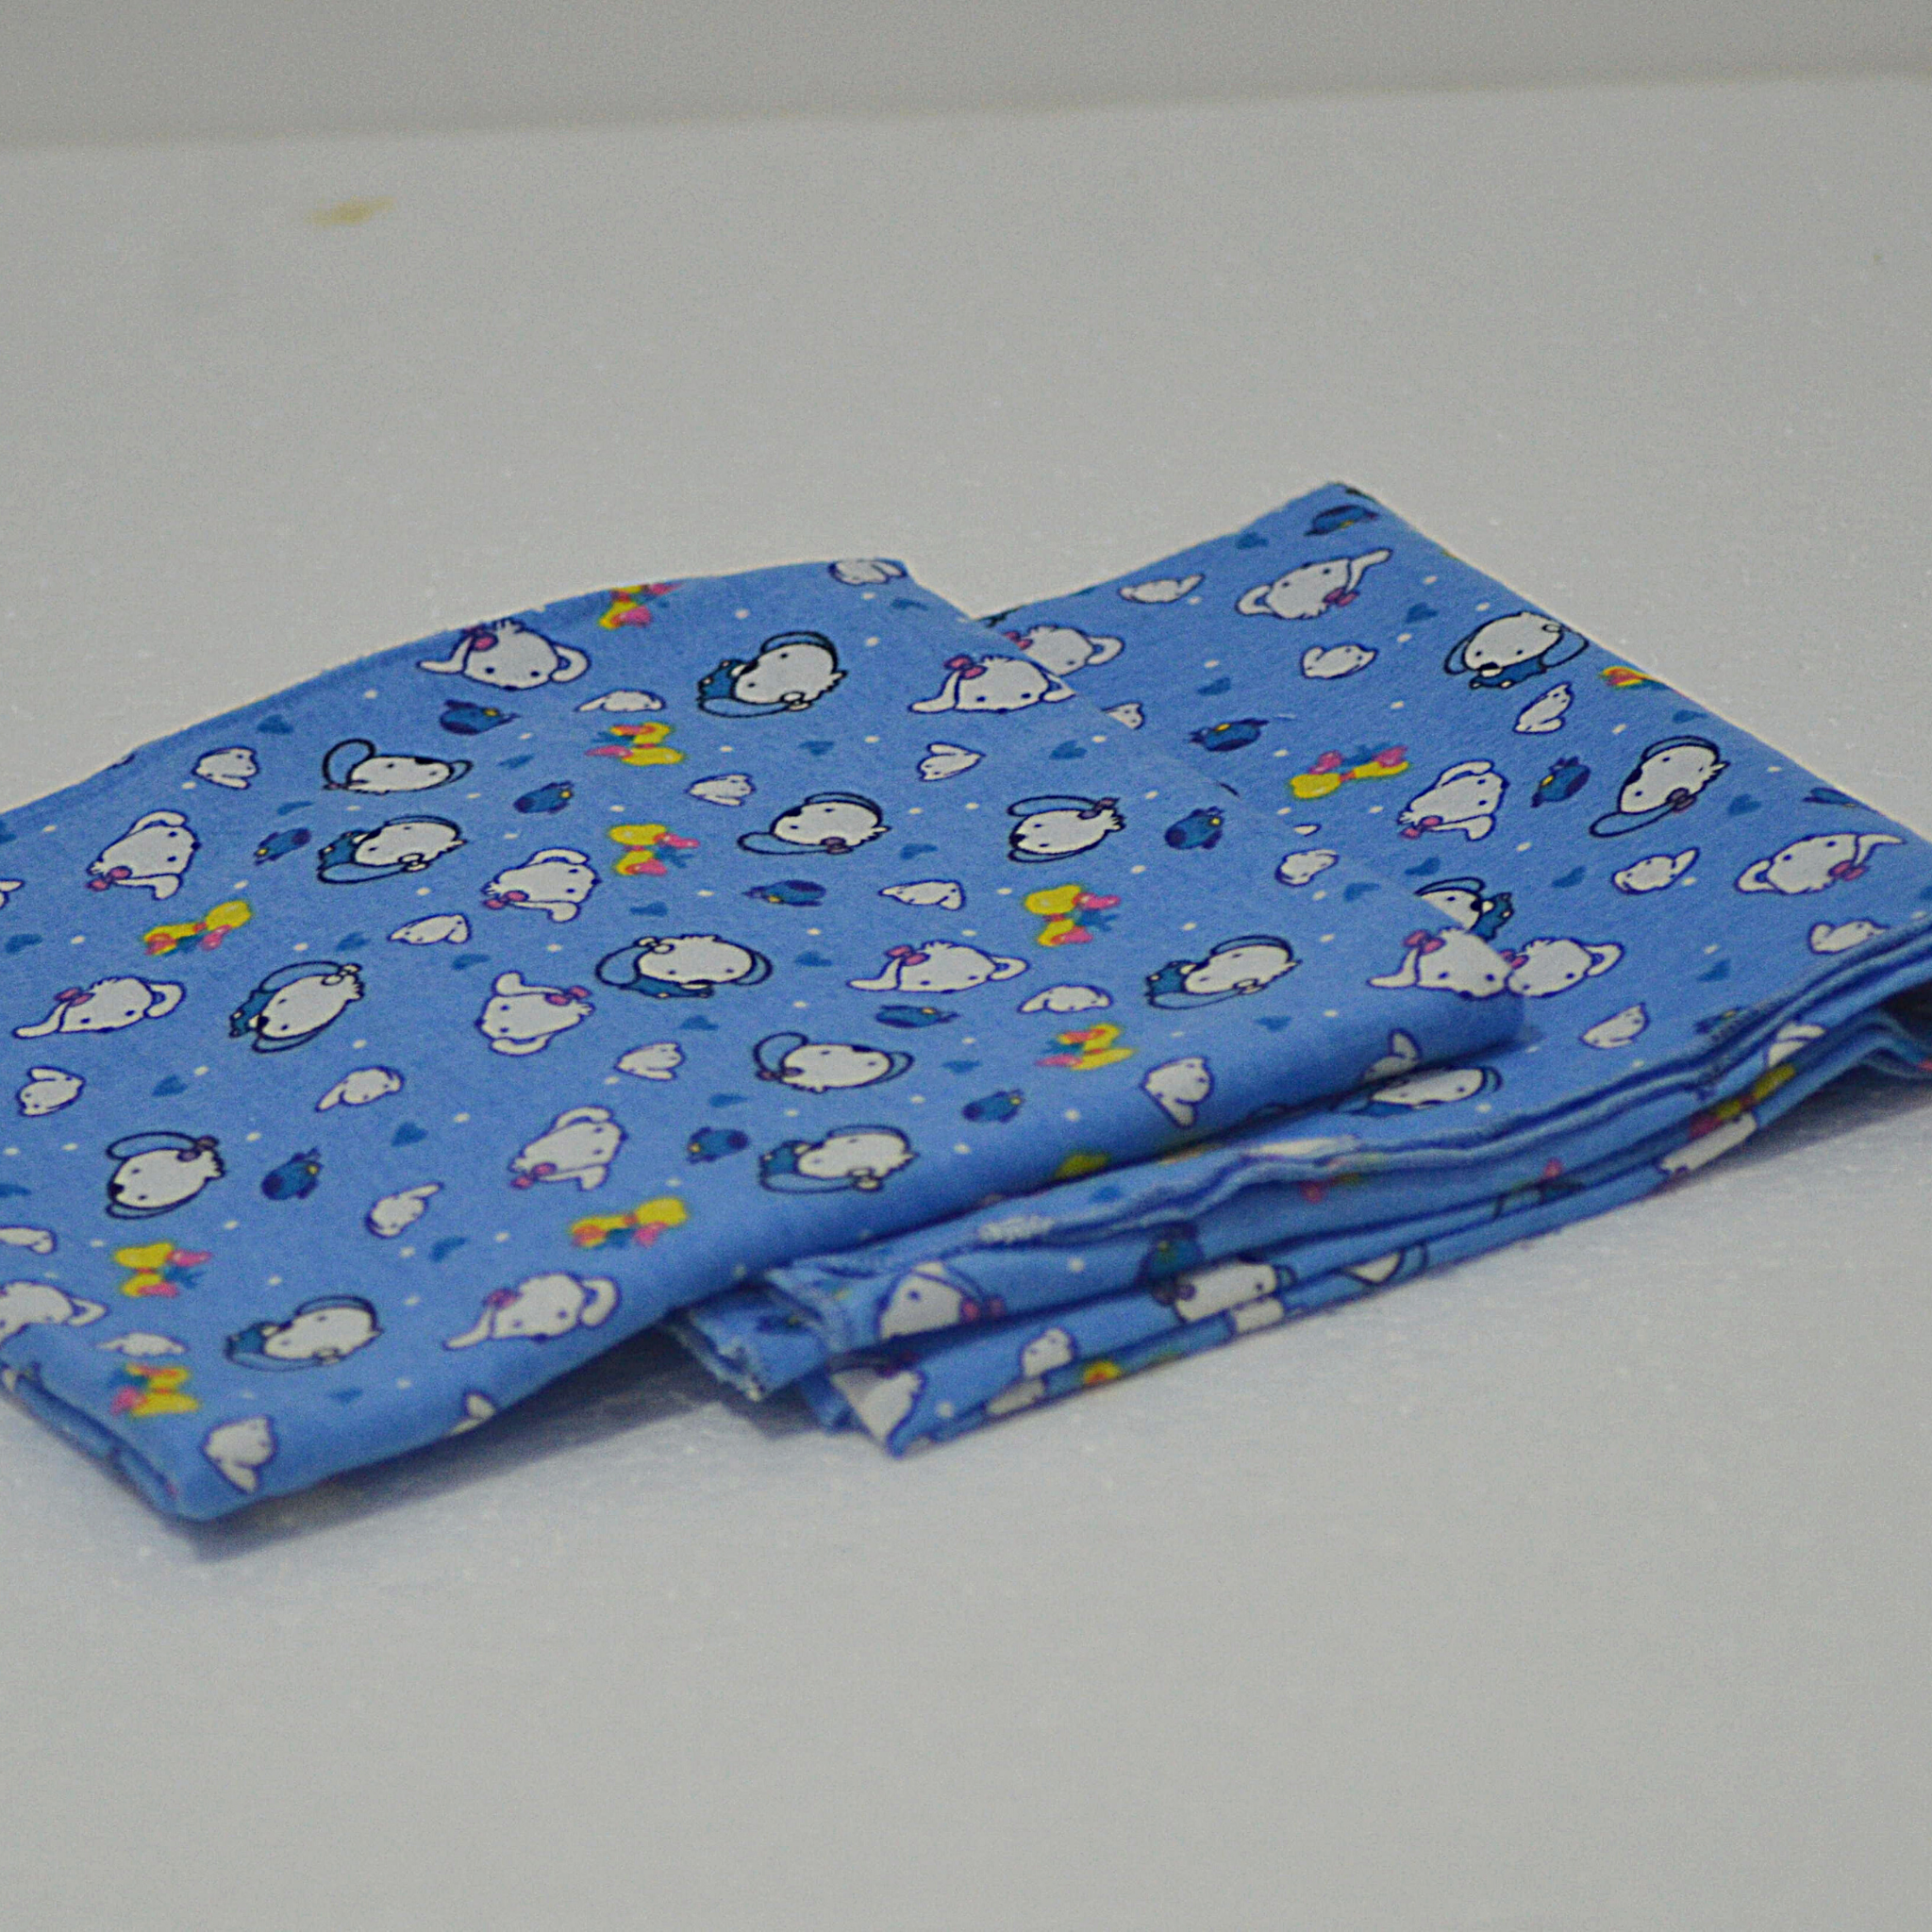 Flannel Receiving Baby Blanket Collection BabySpace Shop